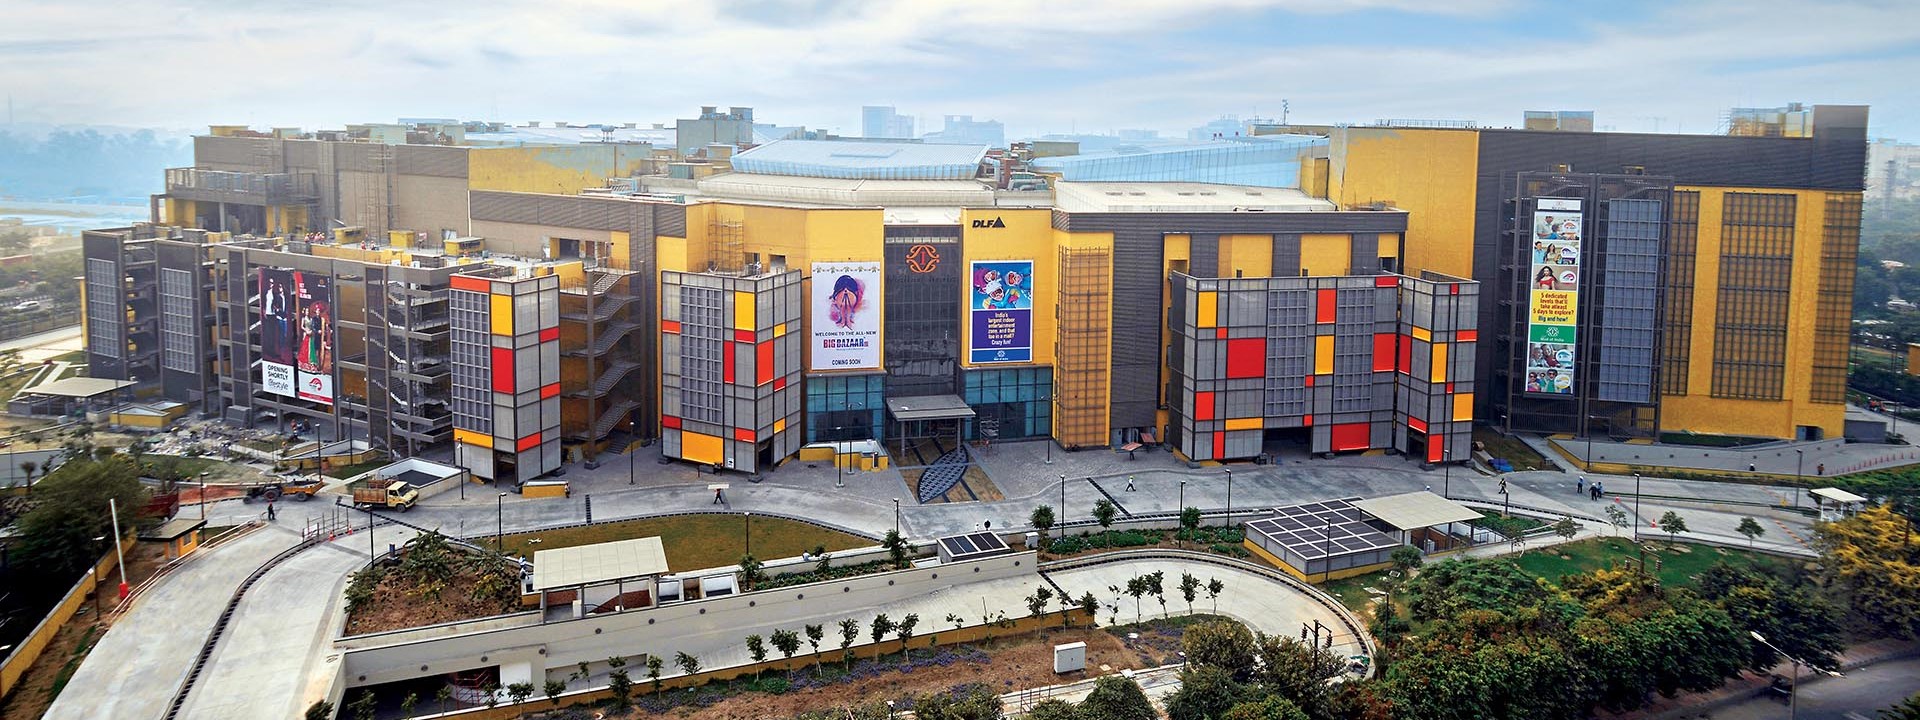 DLF mulls auction bid for Delhi mall with base price of $366 mn